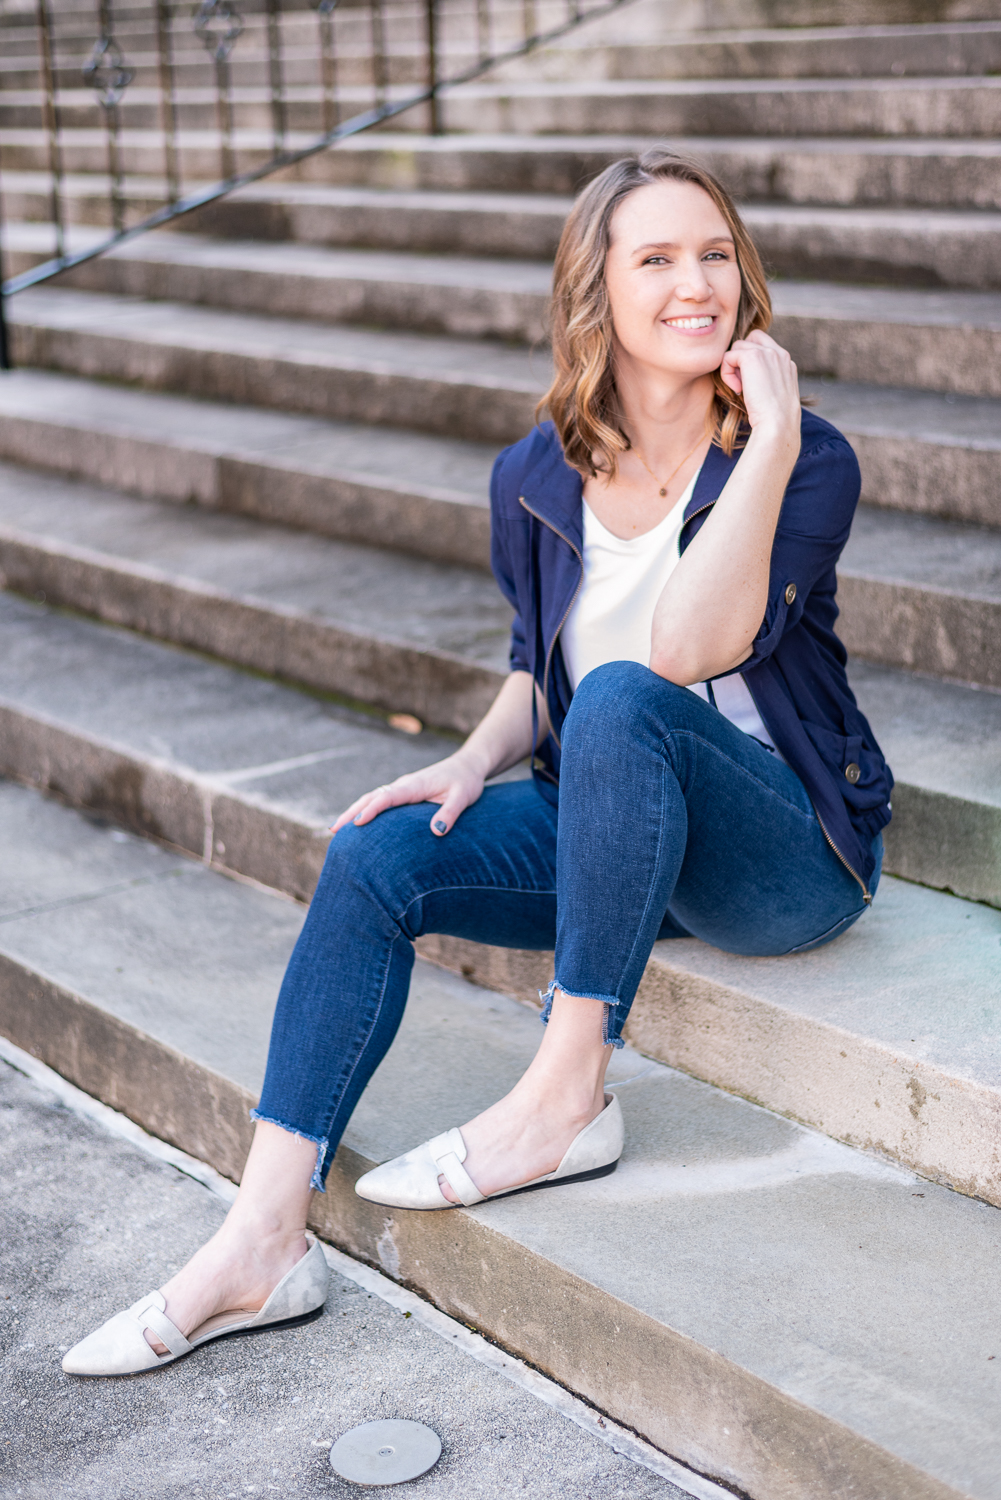 Woman sitting on steps and smiling in downtown Knoxville, TN.